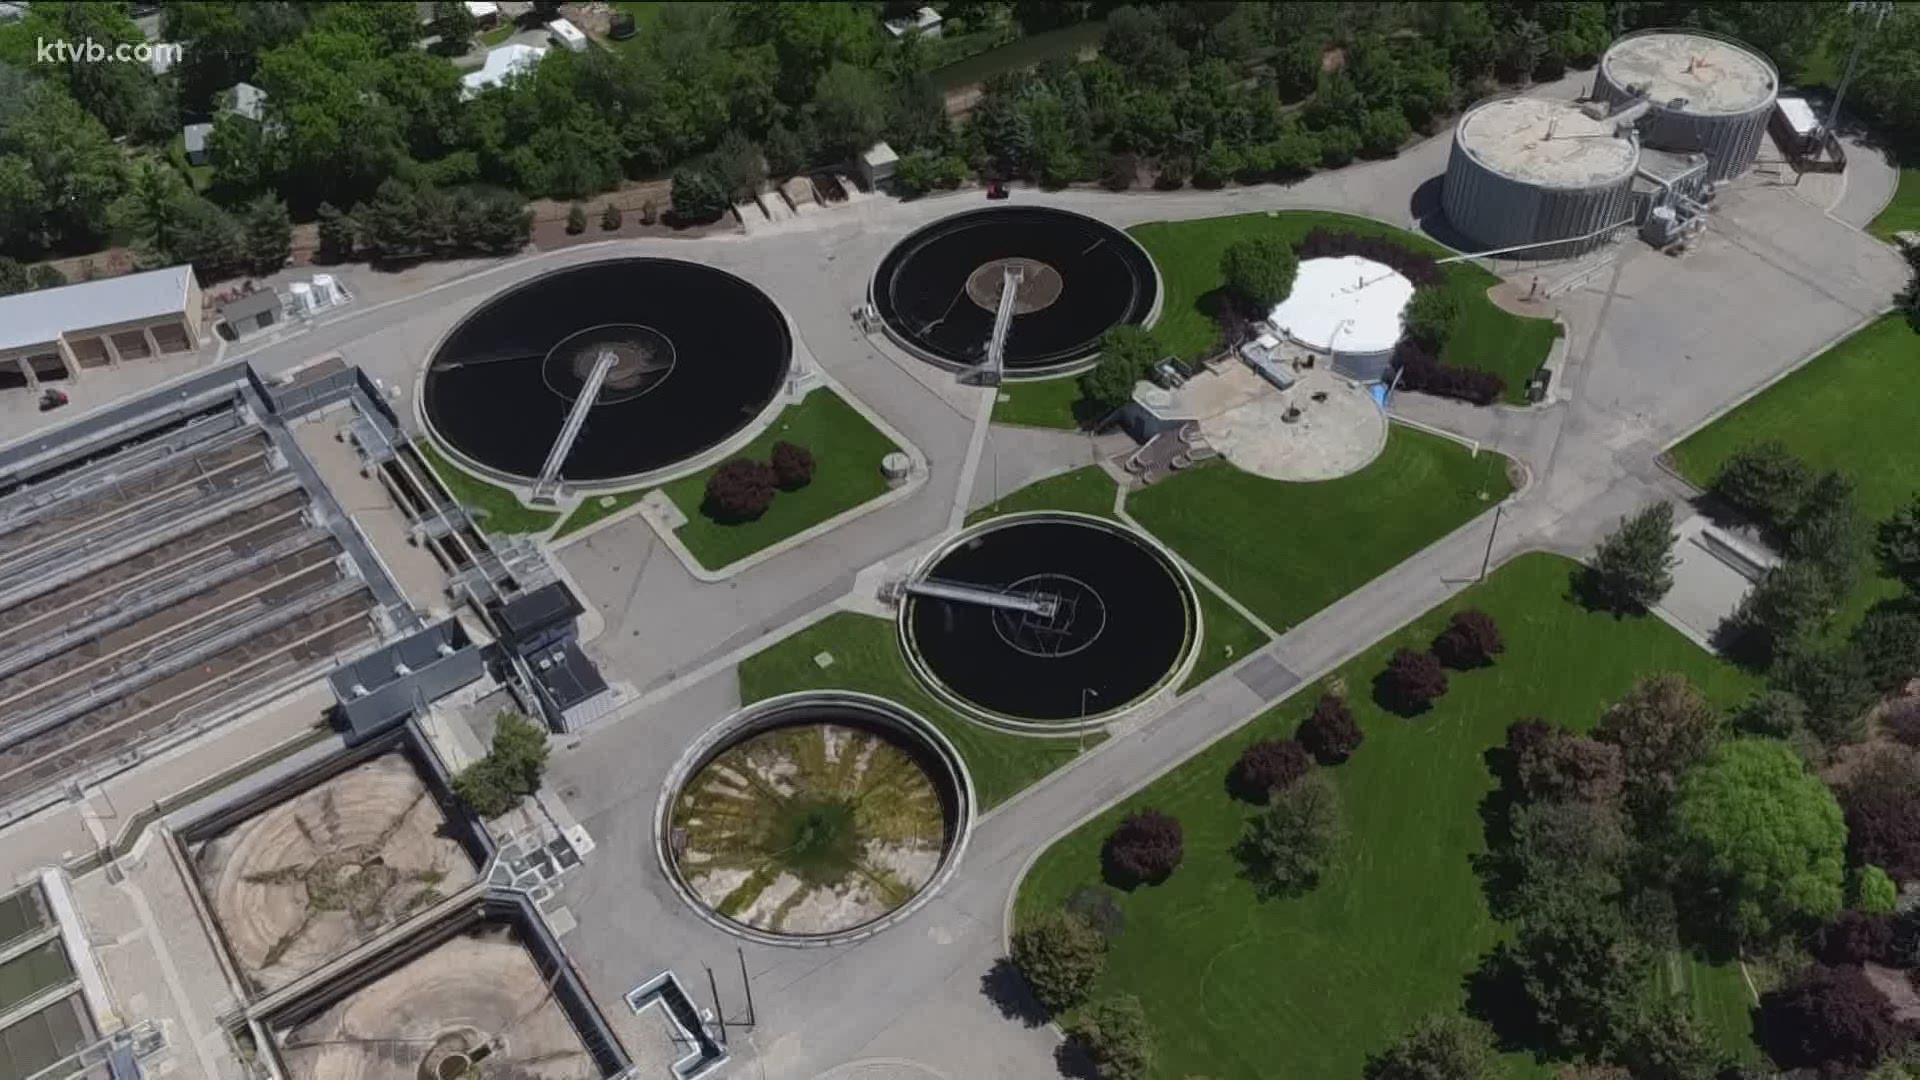 The Bosie City Council voted to approve the Renewable Water Utility Plan in October of 2020. Now, the city is looking at two different options to pay for it.